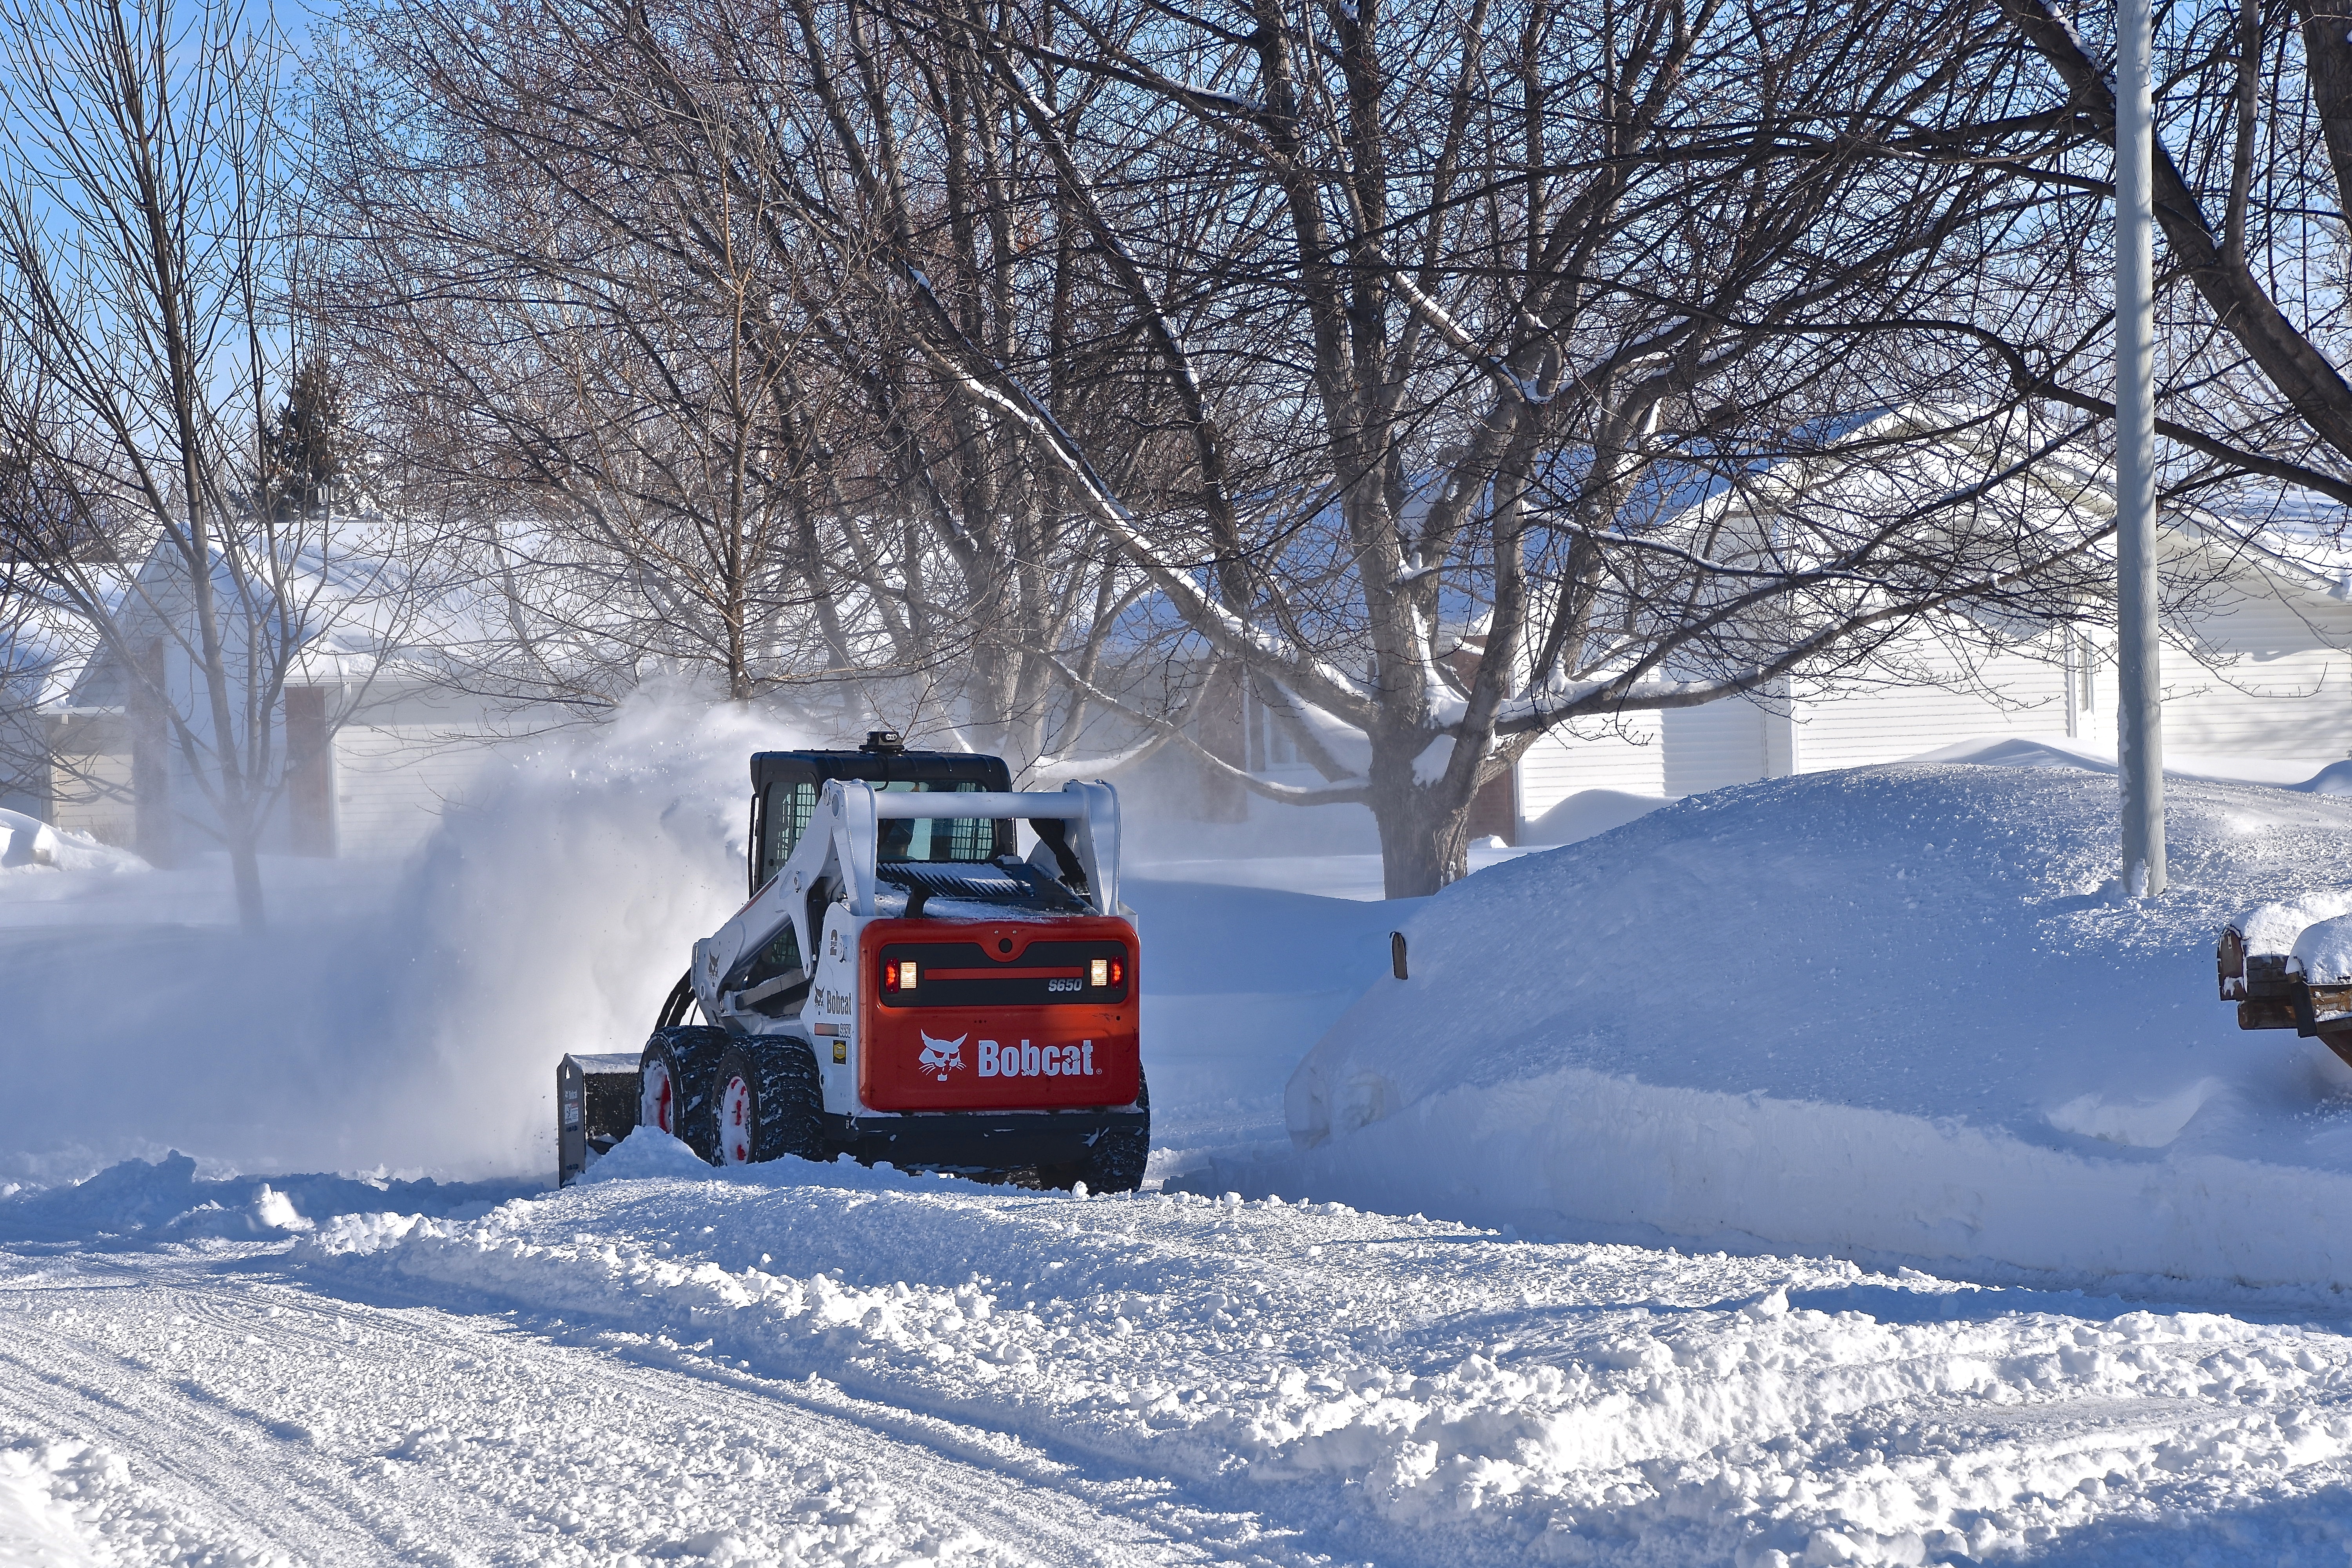 Snow removal after a winter storm in an HOA neighborhood.